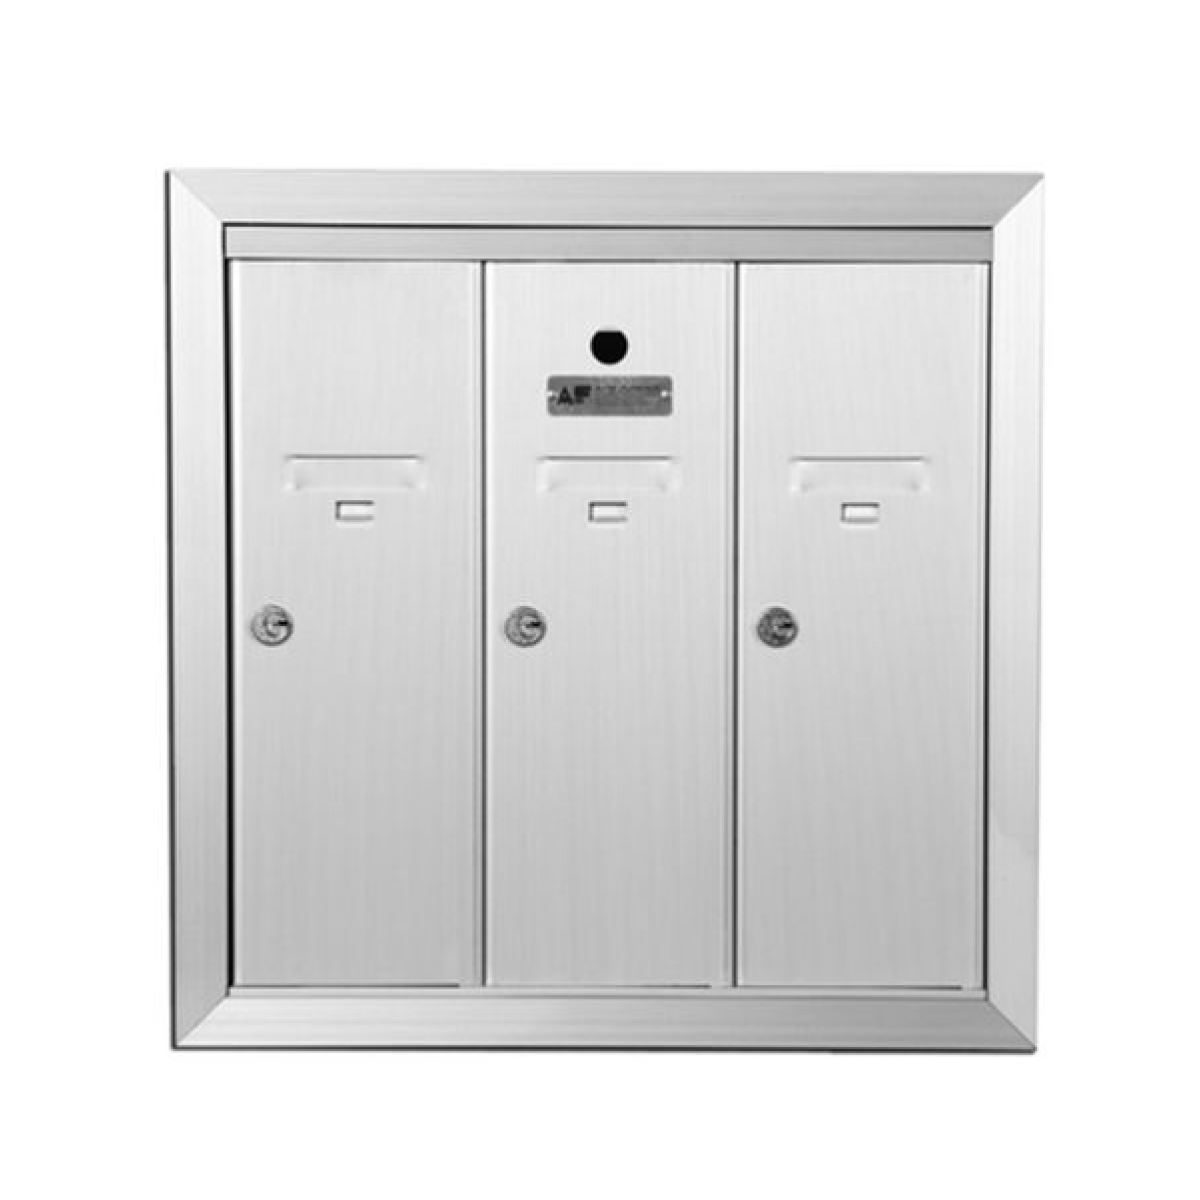 Anodized Aluminum Florence 3 Door Vertical Mailbox Product Image